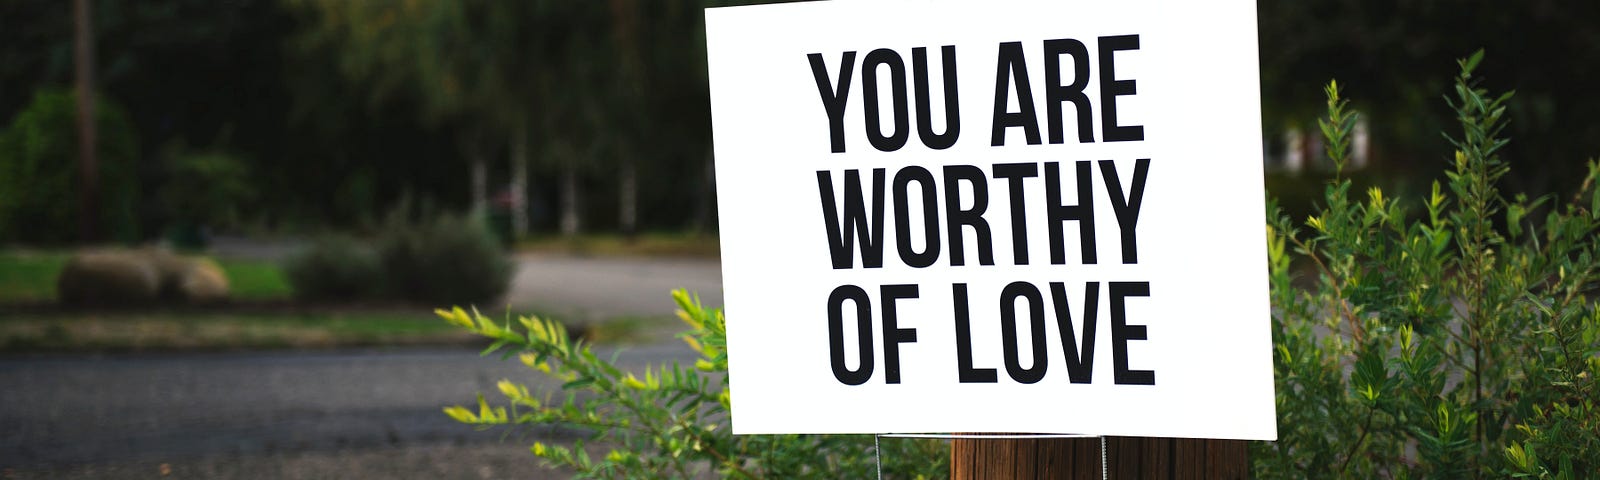 A white sign saying “you are worthy of love”